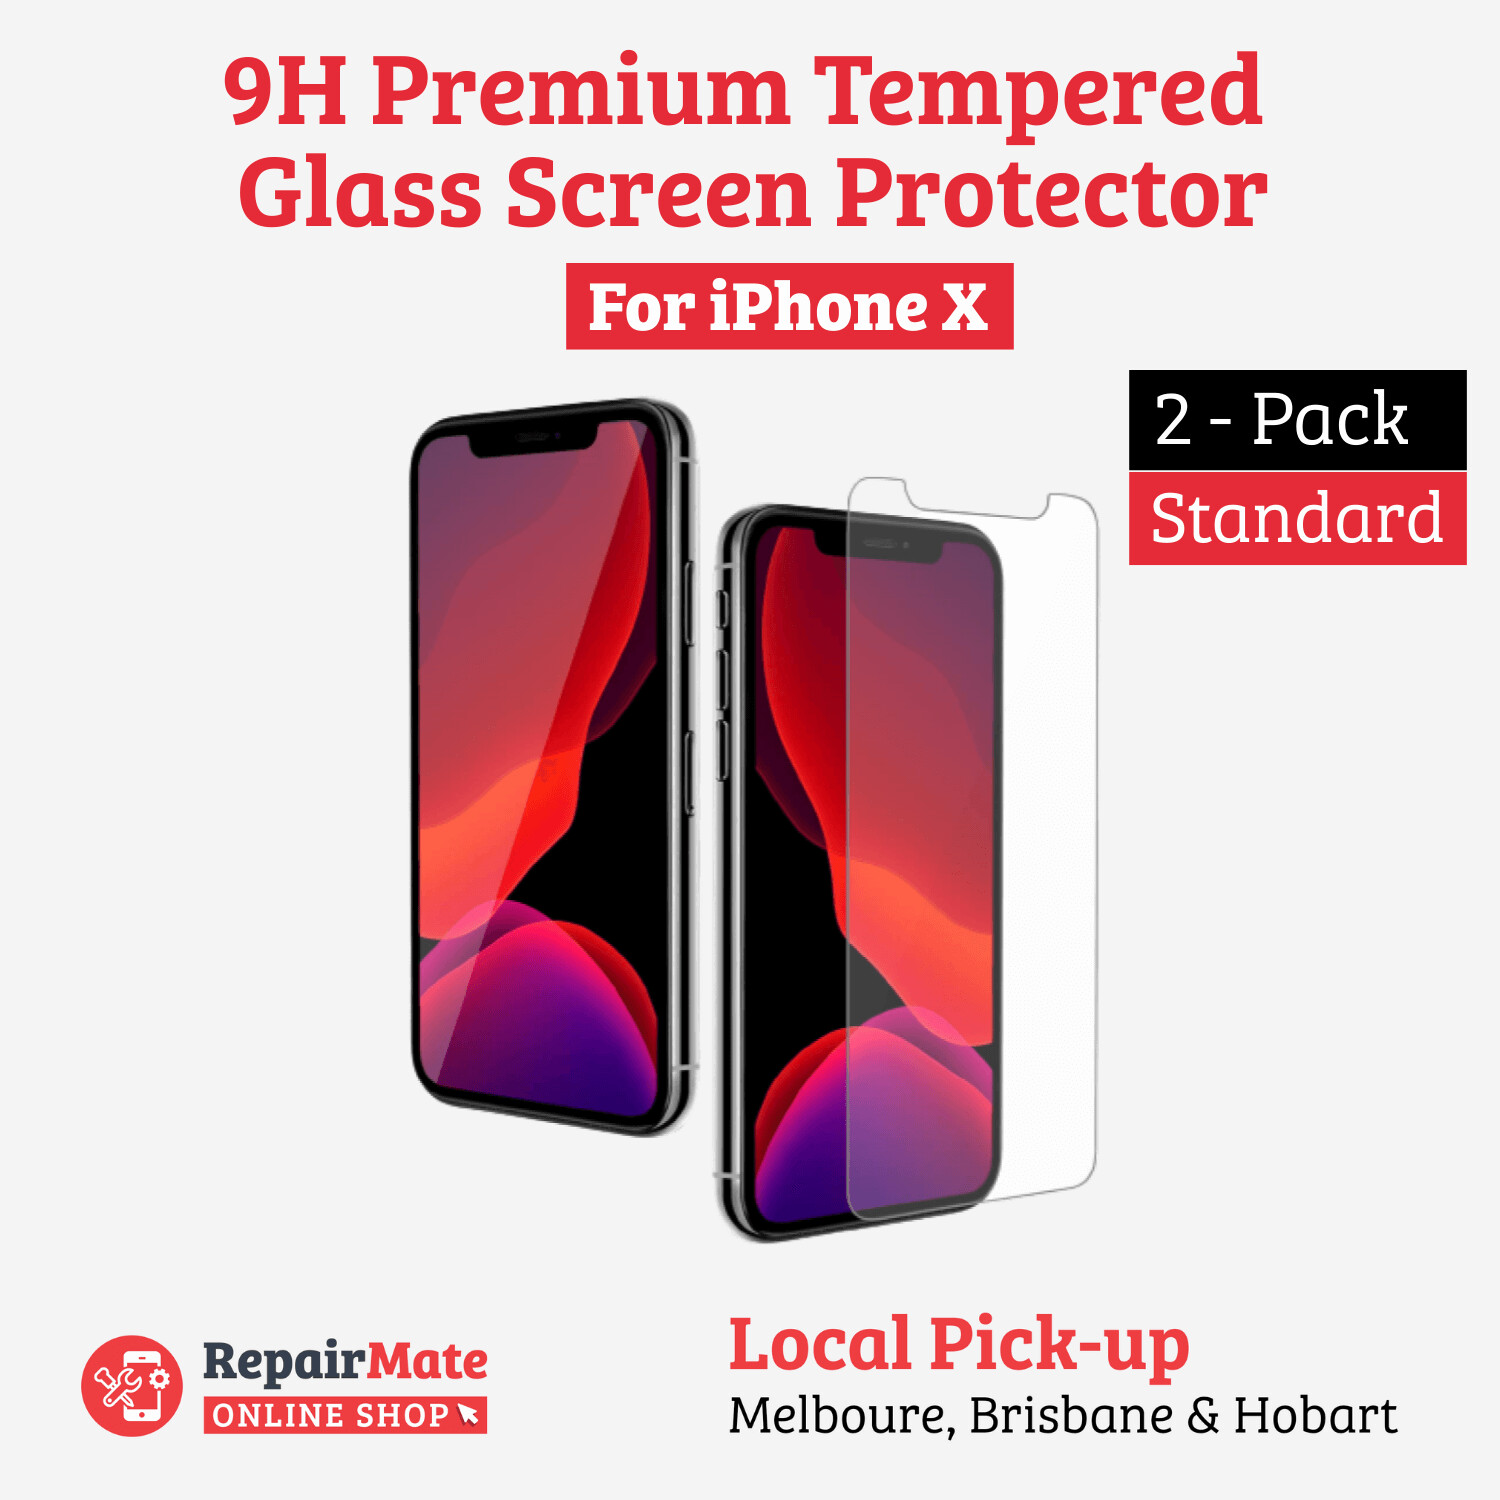 iPhone X 9H Premium Tempered Glass Screen Protector [2 Pack]